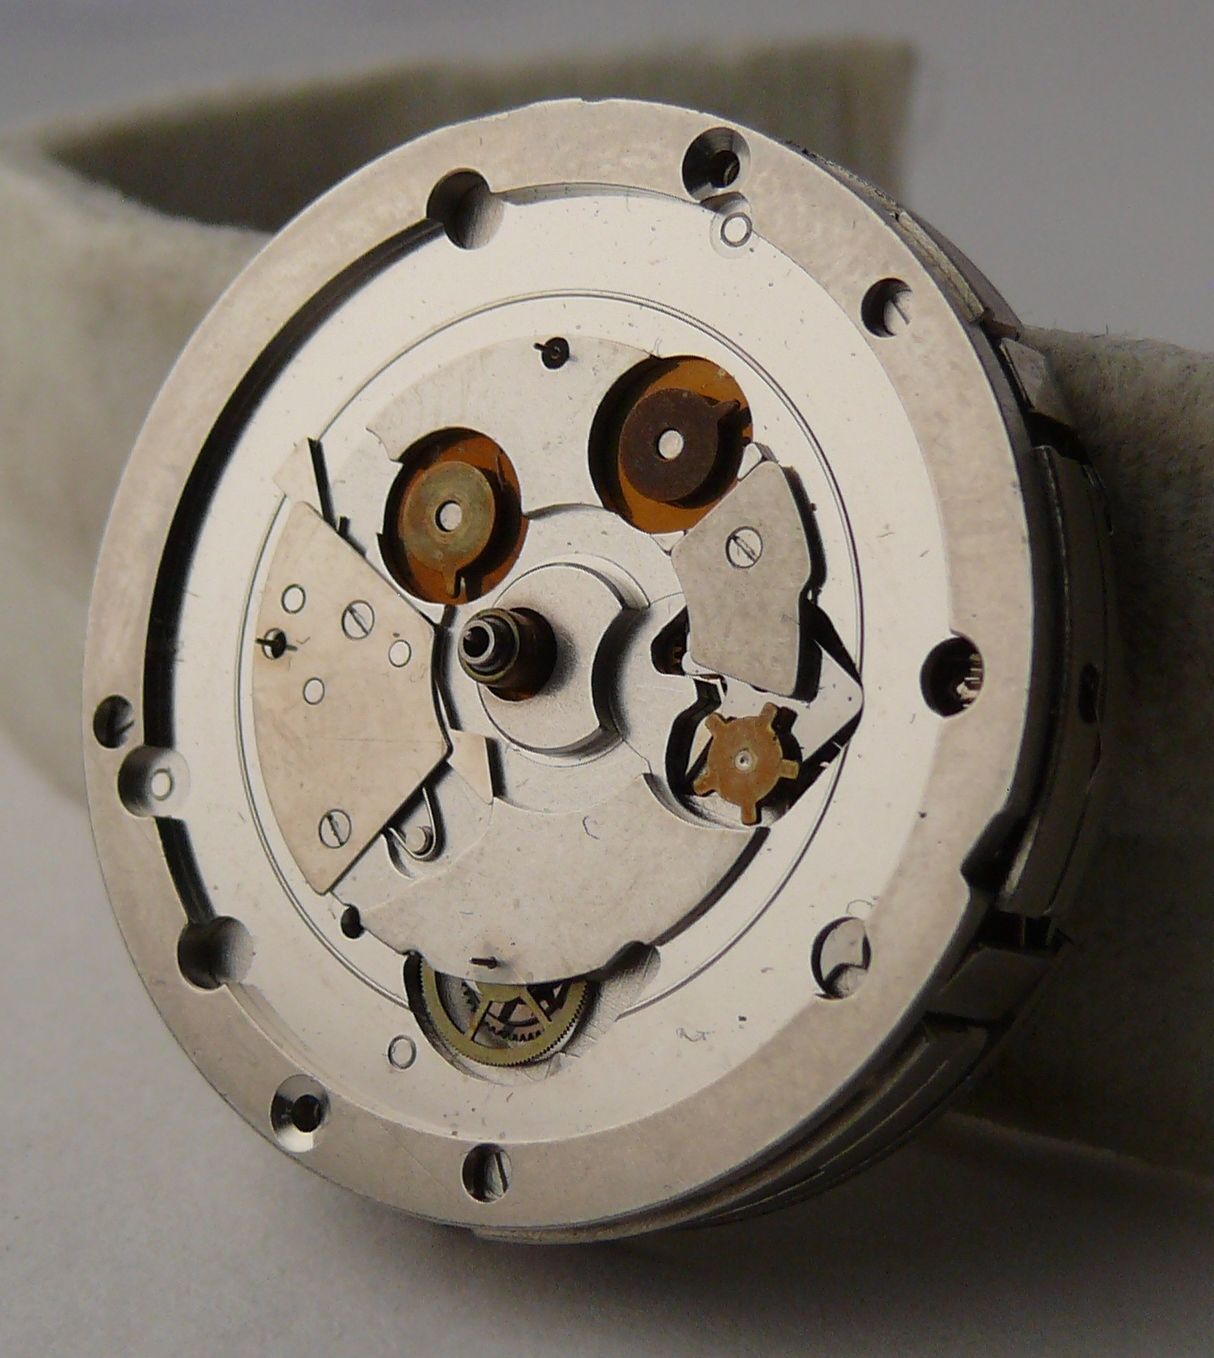 Vintage Valjoux Chronograph 7750 Incomplete Movement. Suitable for parts projects or being restored.